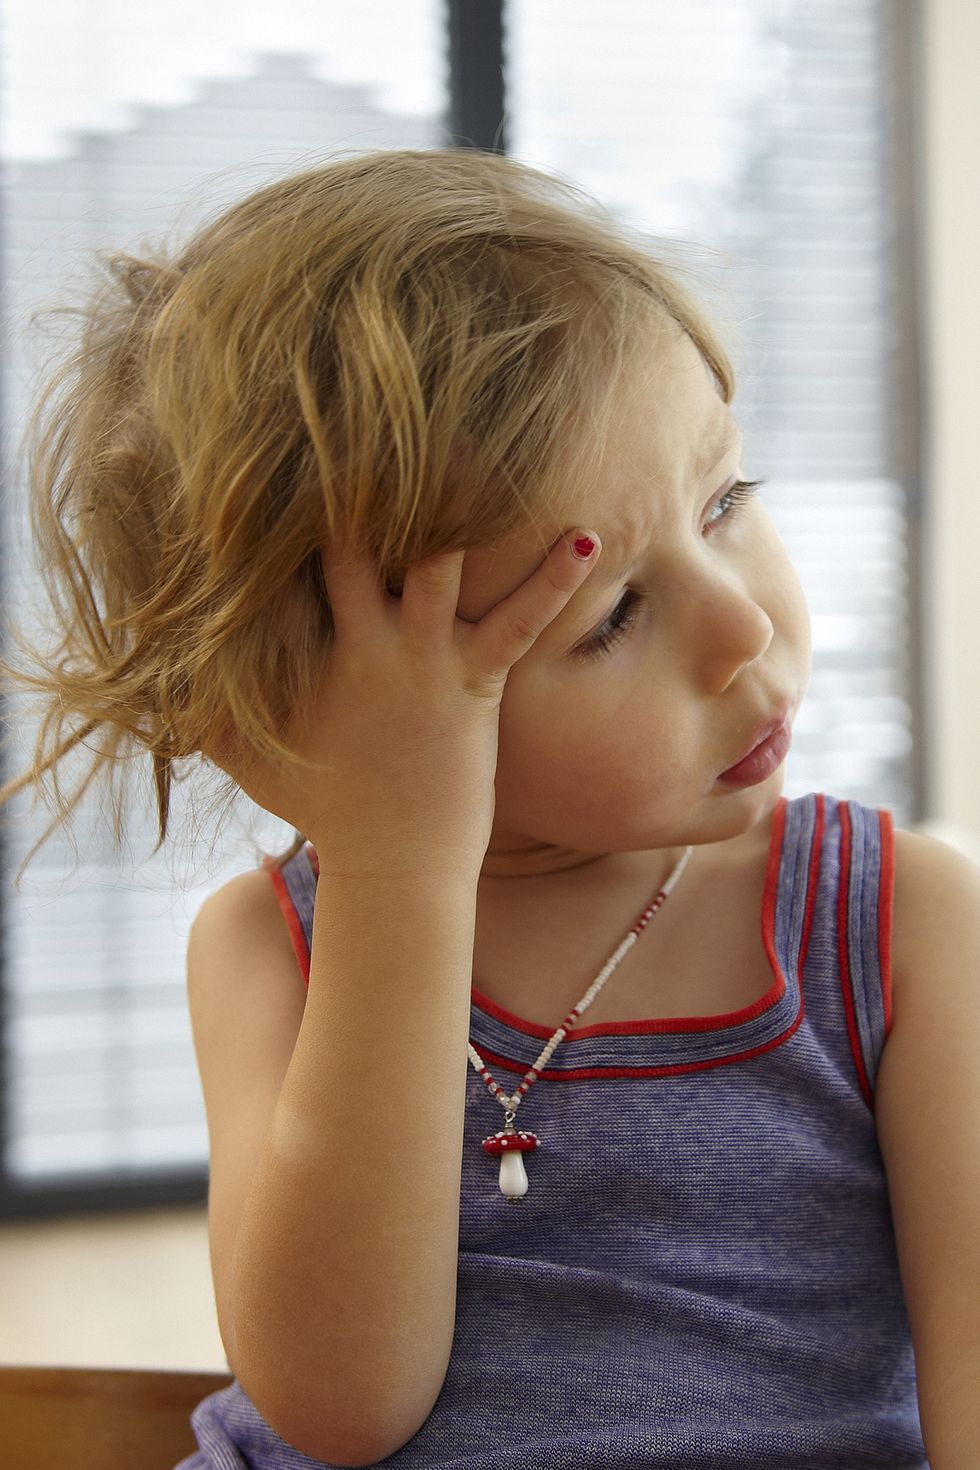 signs of child anxiety: headaches and stomachaches